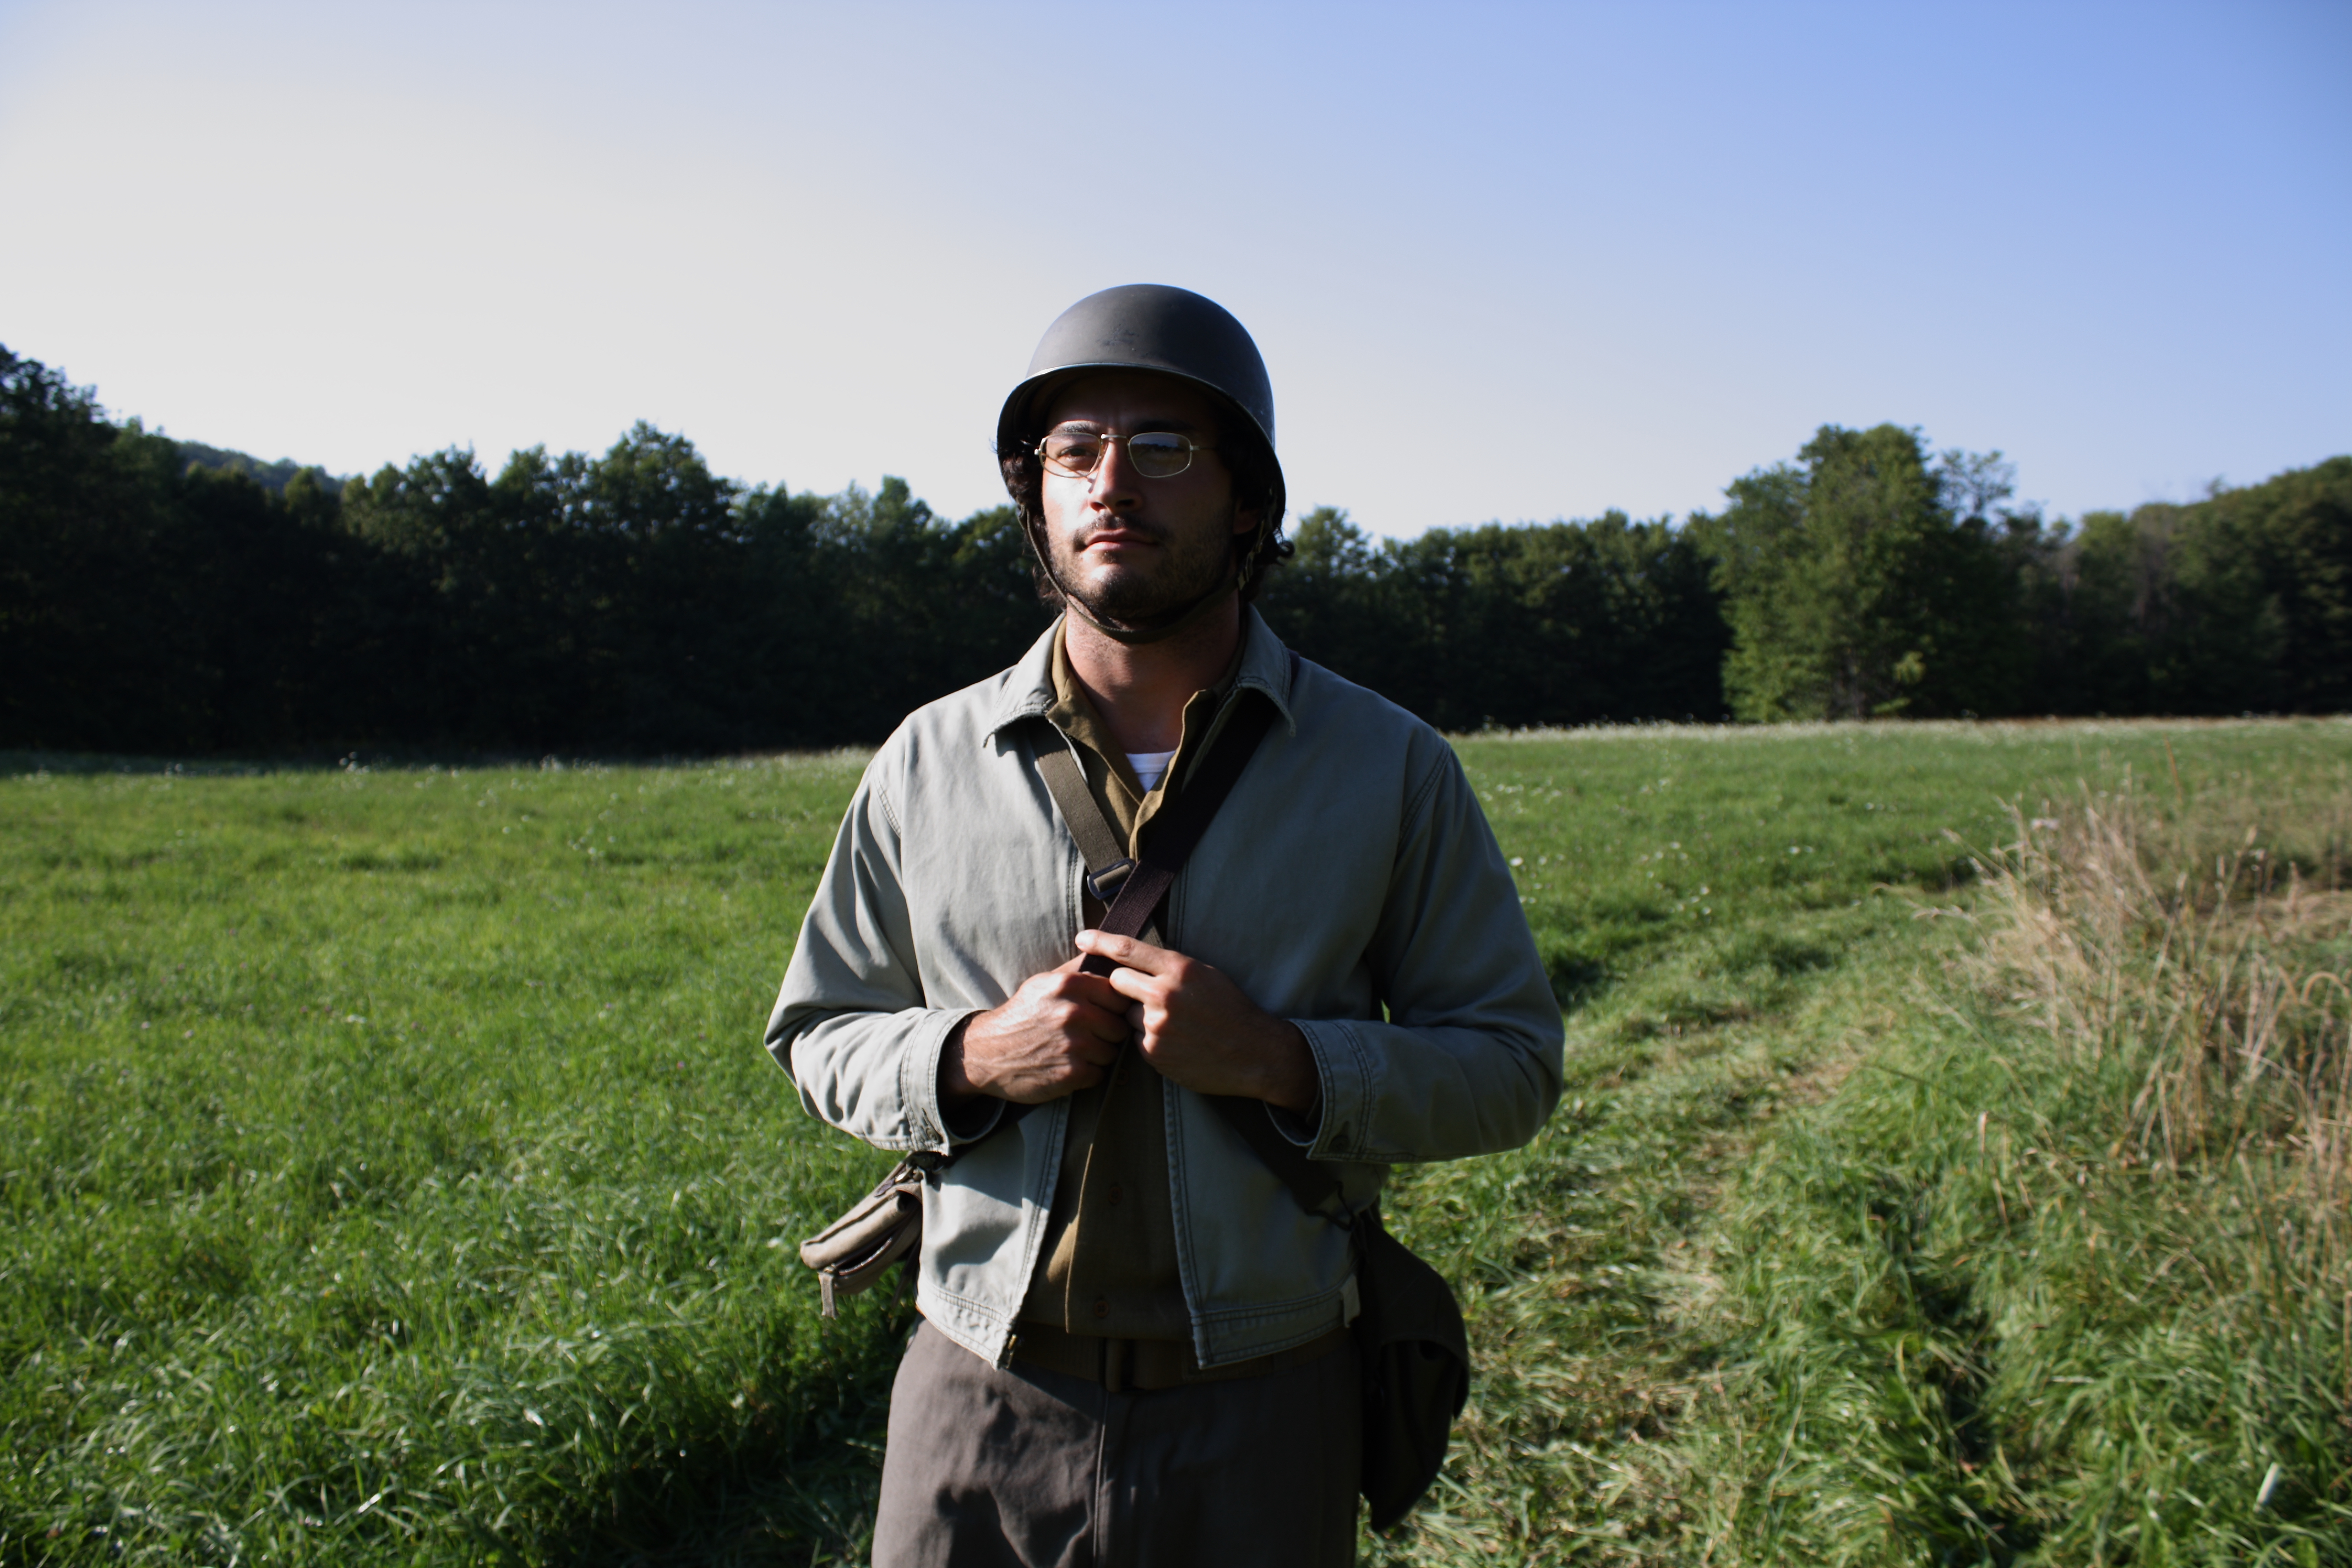 Dan Palermo as Specs in Atheists in Foxholes